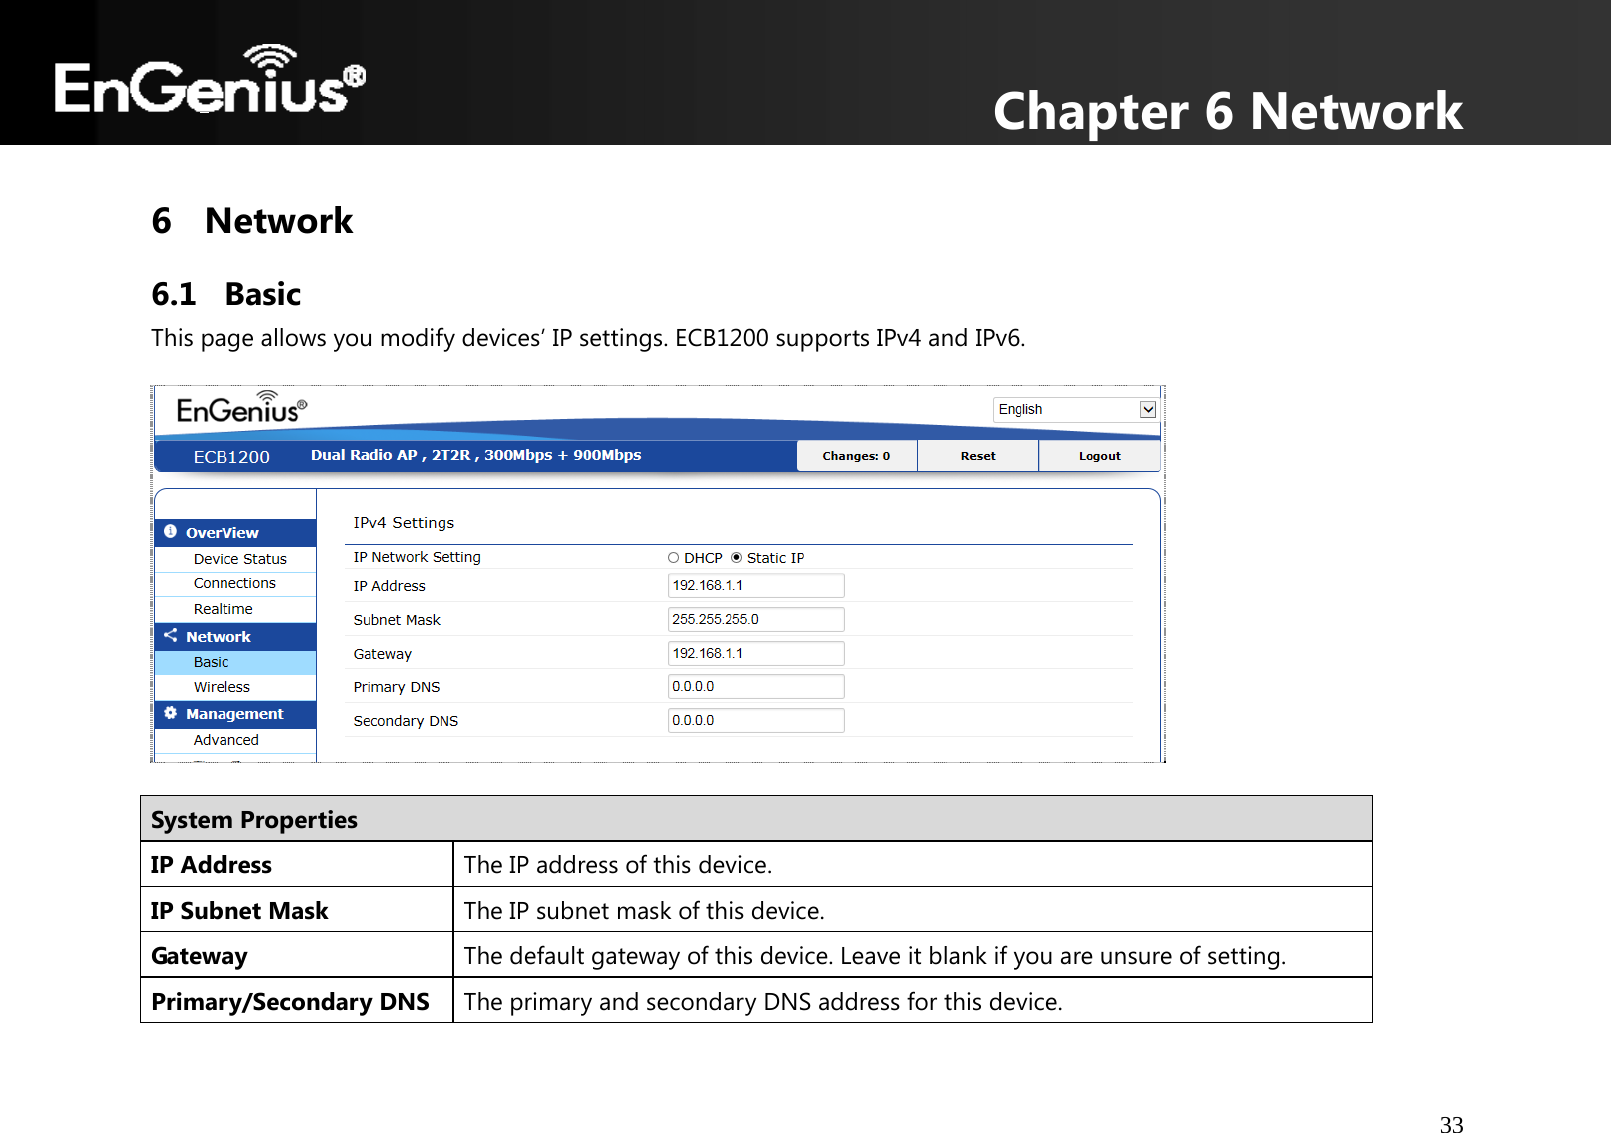 Chapter 6 Network 33  6 Network 6.1 Basic This page allows you modify devices’ IP settings. ECB1200 supports IPv4 and IPv6.    System Properties IP Address   The IP address of this device. IP Subnet Mask  The IP subnet mask of this device. Gateway The default gateway of this device. Leave it blank if you are unsure of setting.Primary/Secondary DNS   The primary and secondary DNS address for this device.